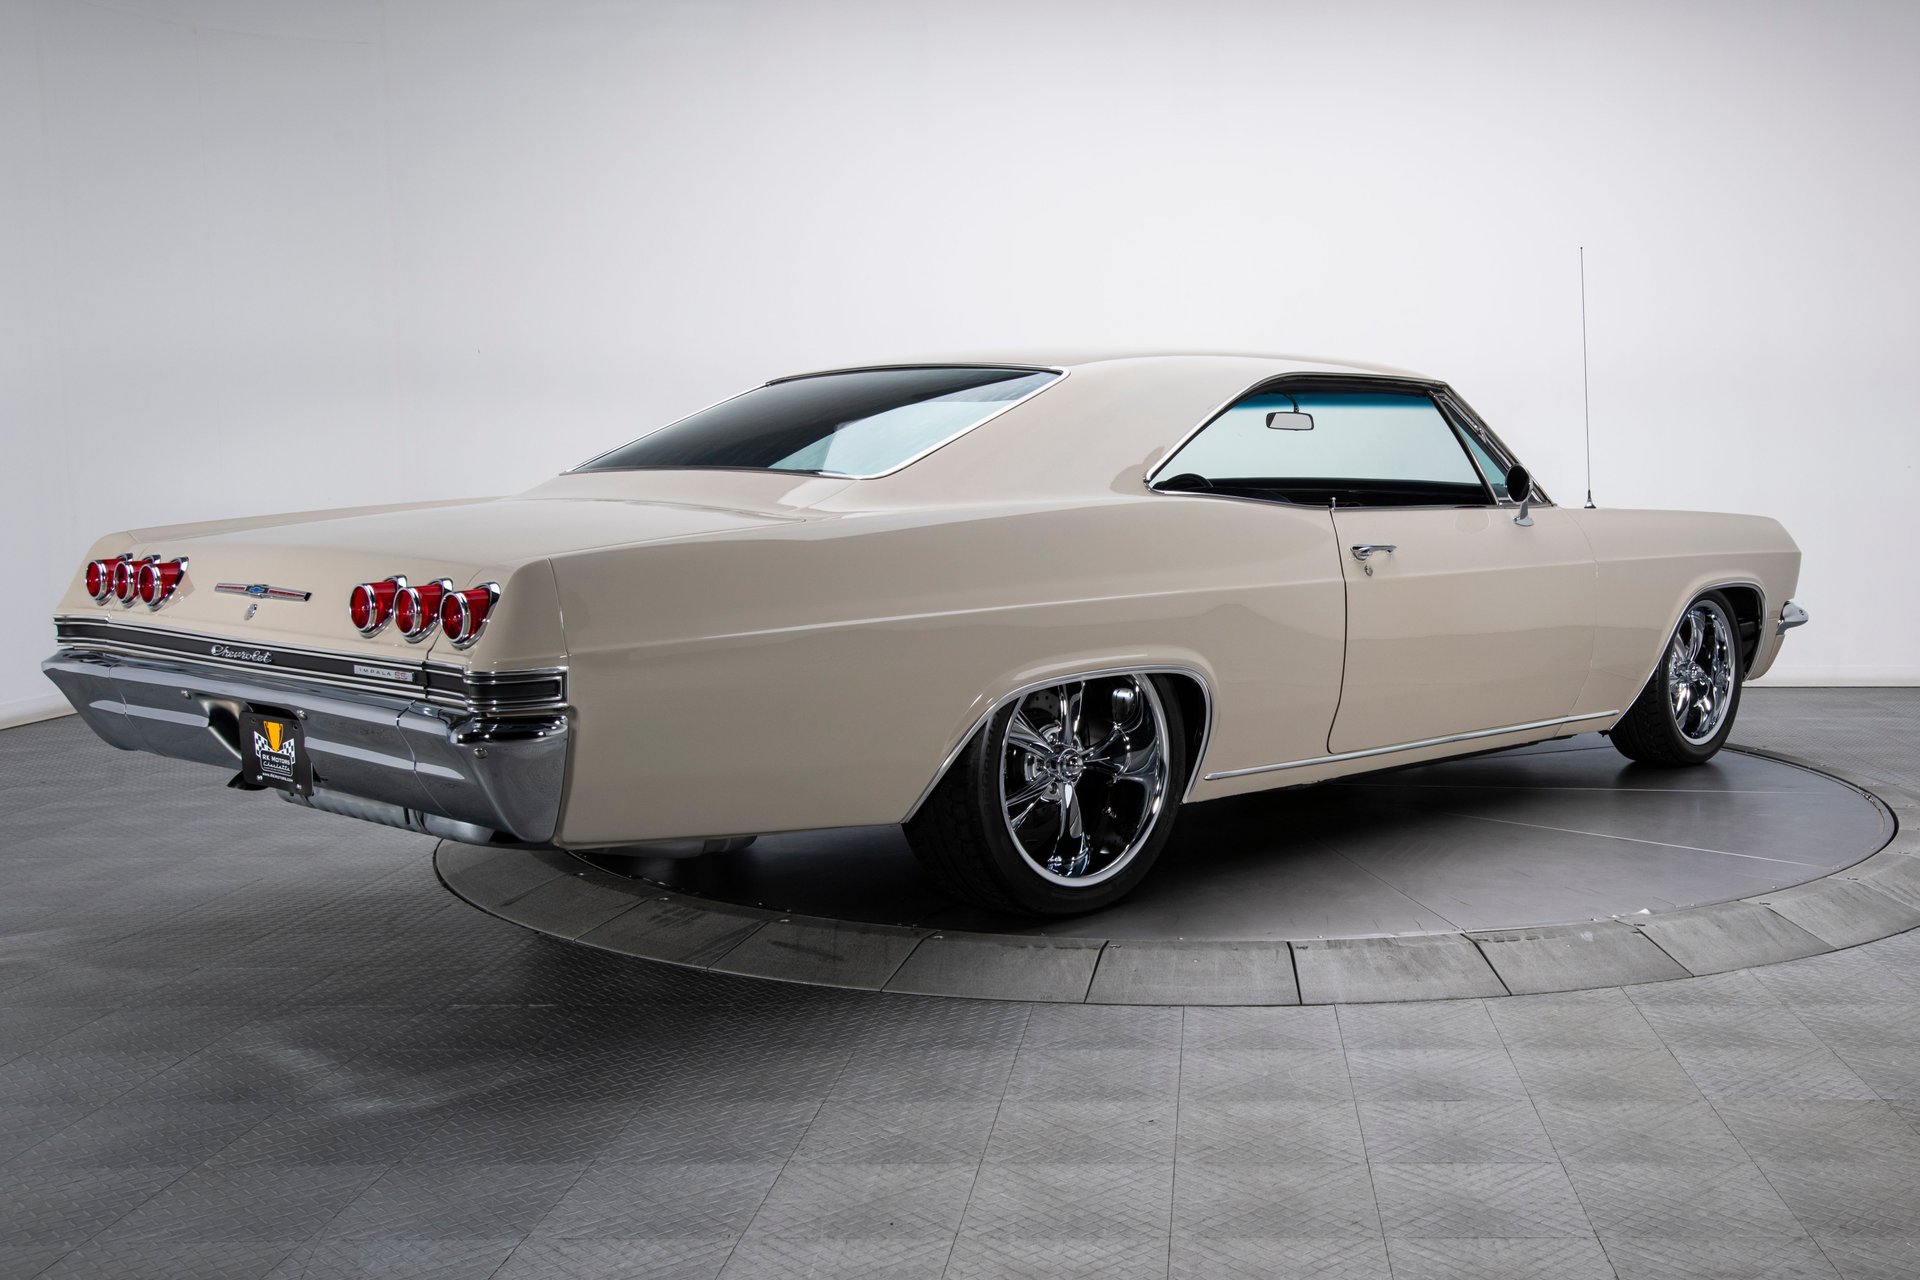 This 1965 Chevy Impala Ss Combines Restomod Beauty With Ls2 V8 Brawn Autoevolution